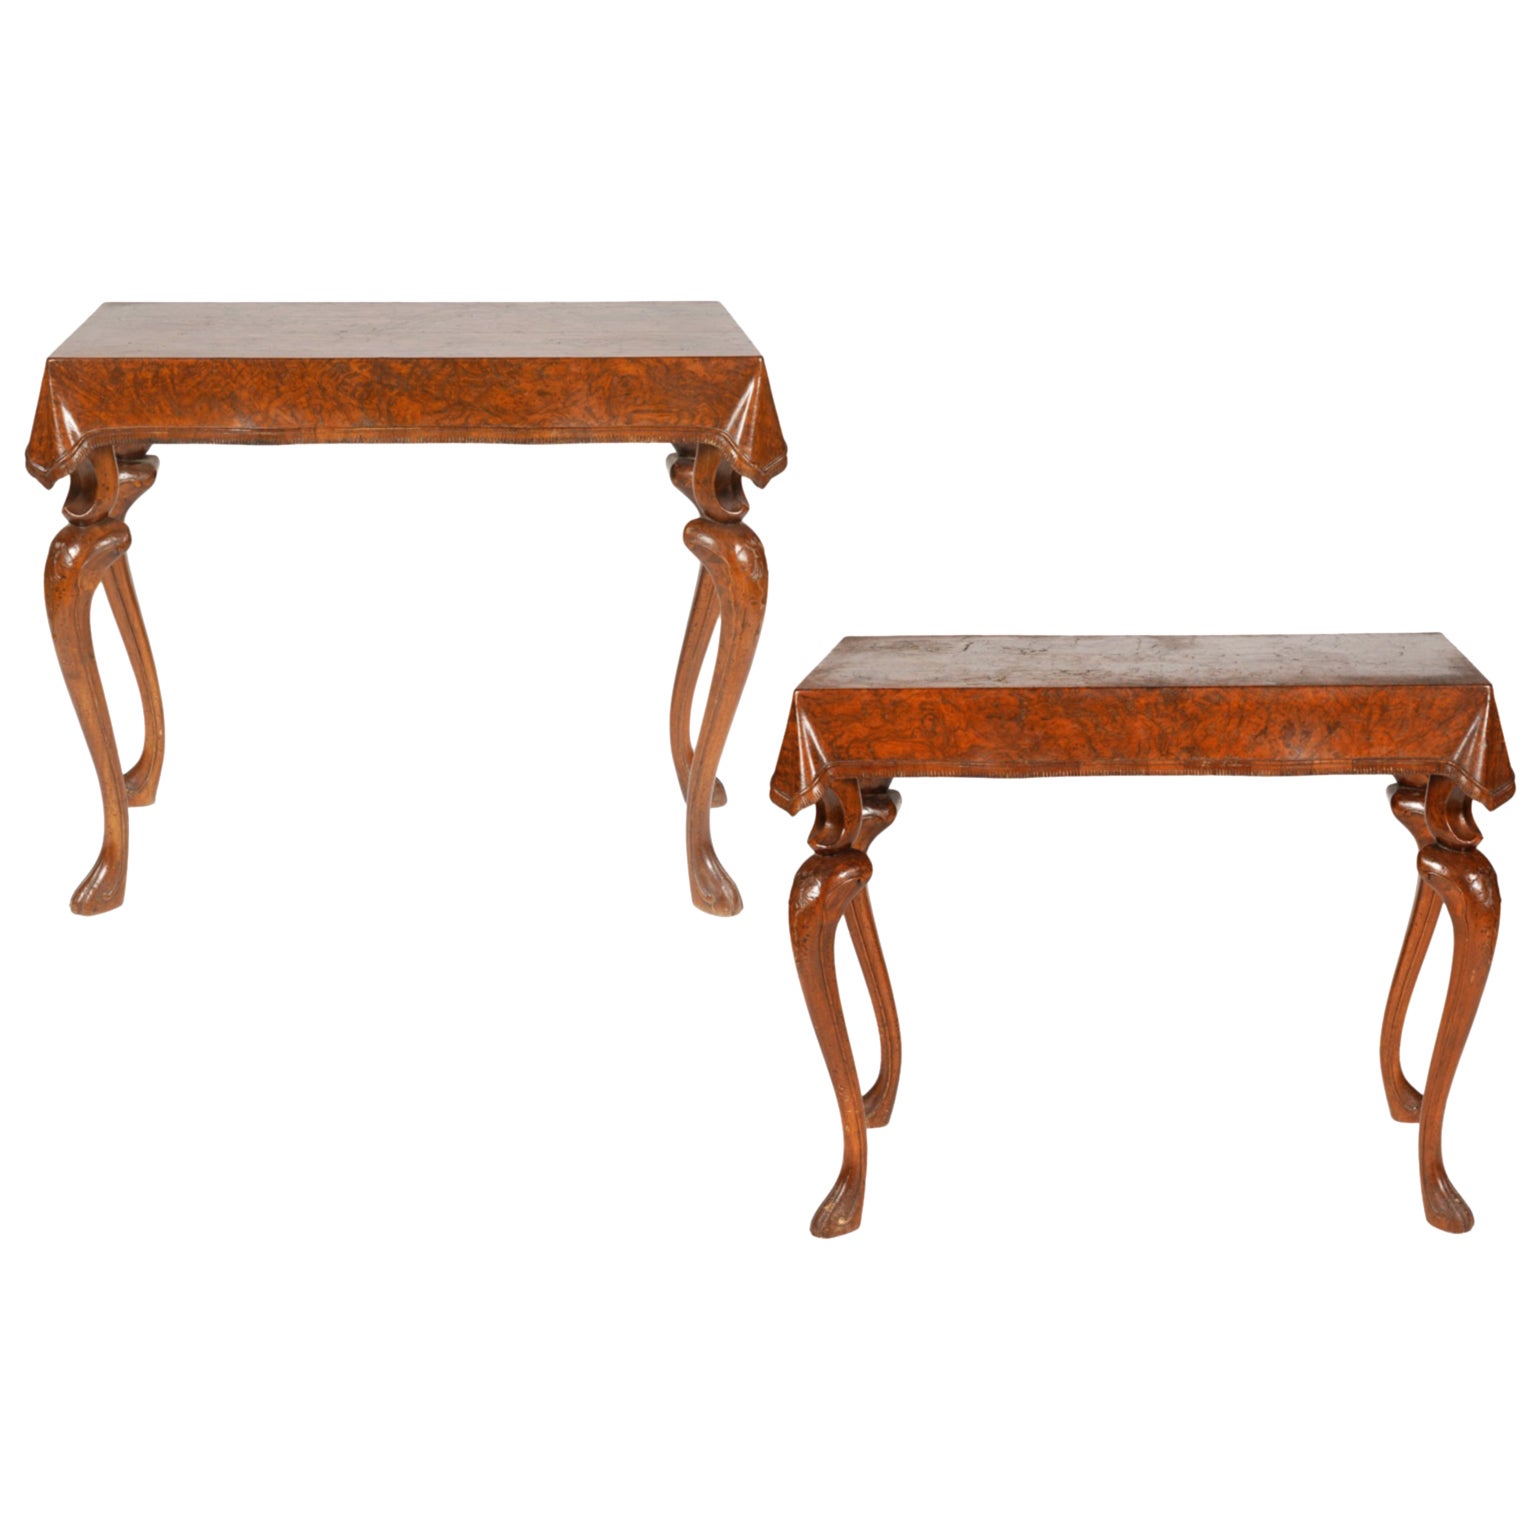 Pair of Italian Sculptural Carved Walnut and Olive Wood Console Tables, 1920's